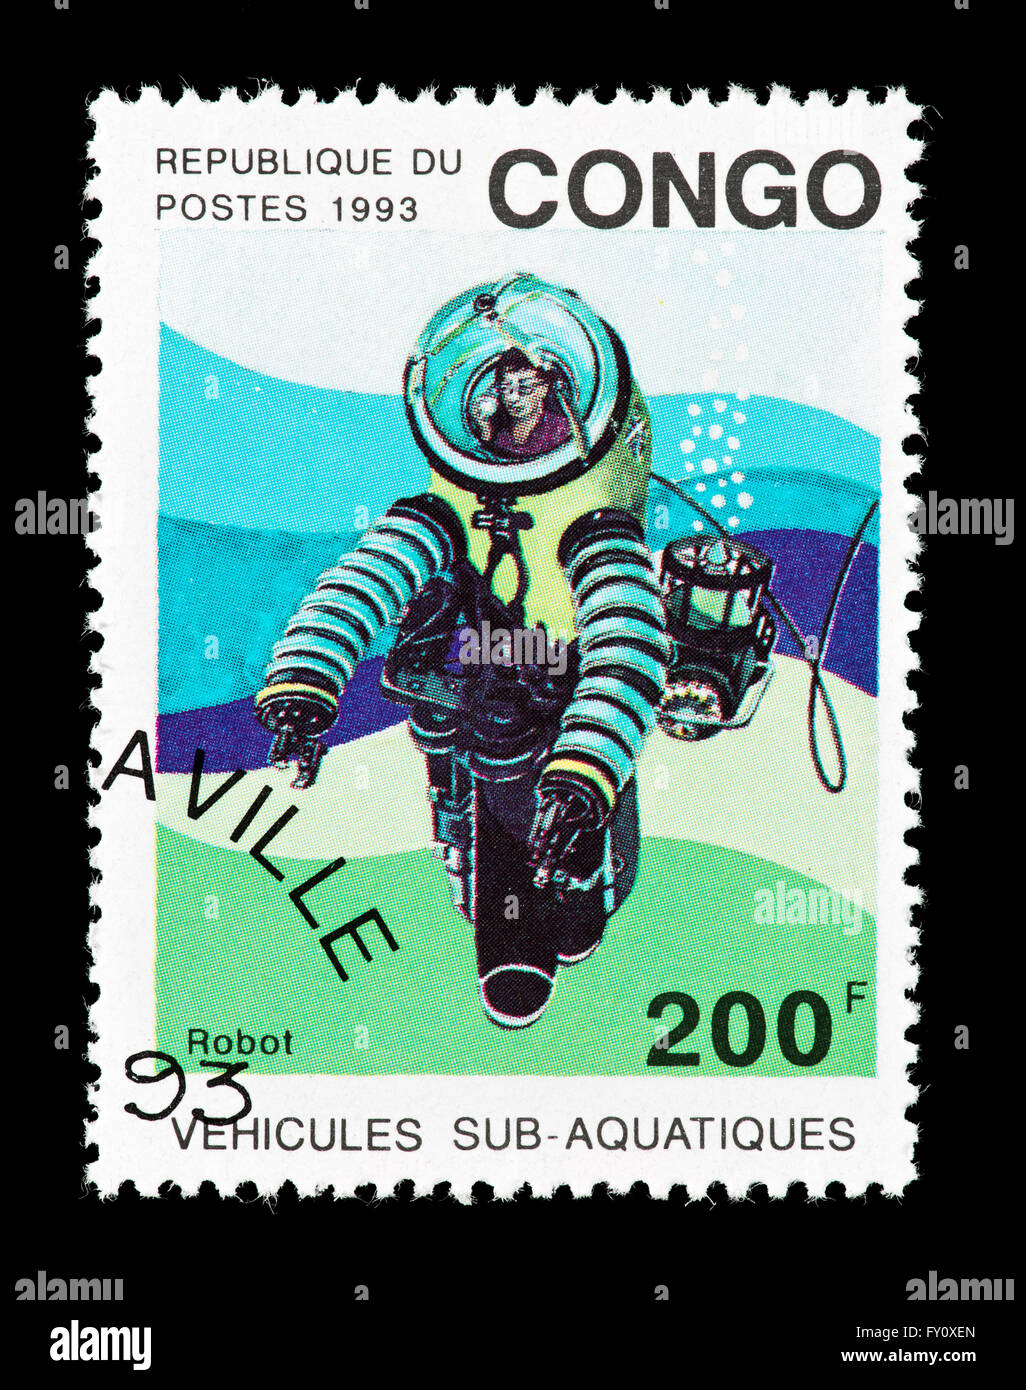 Postage stamp from Congo depicting a robot deep sea submersible. Stock Photo